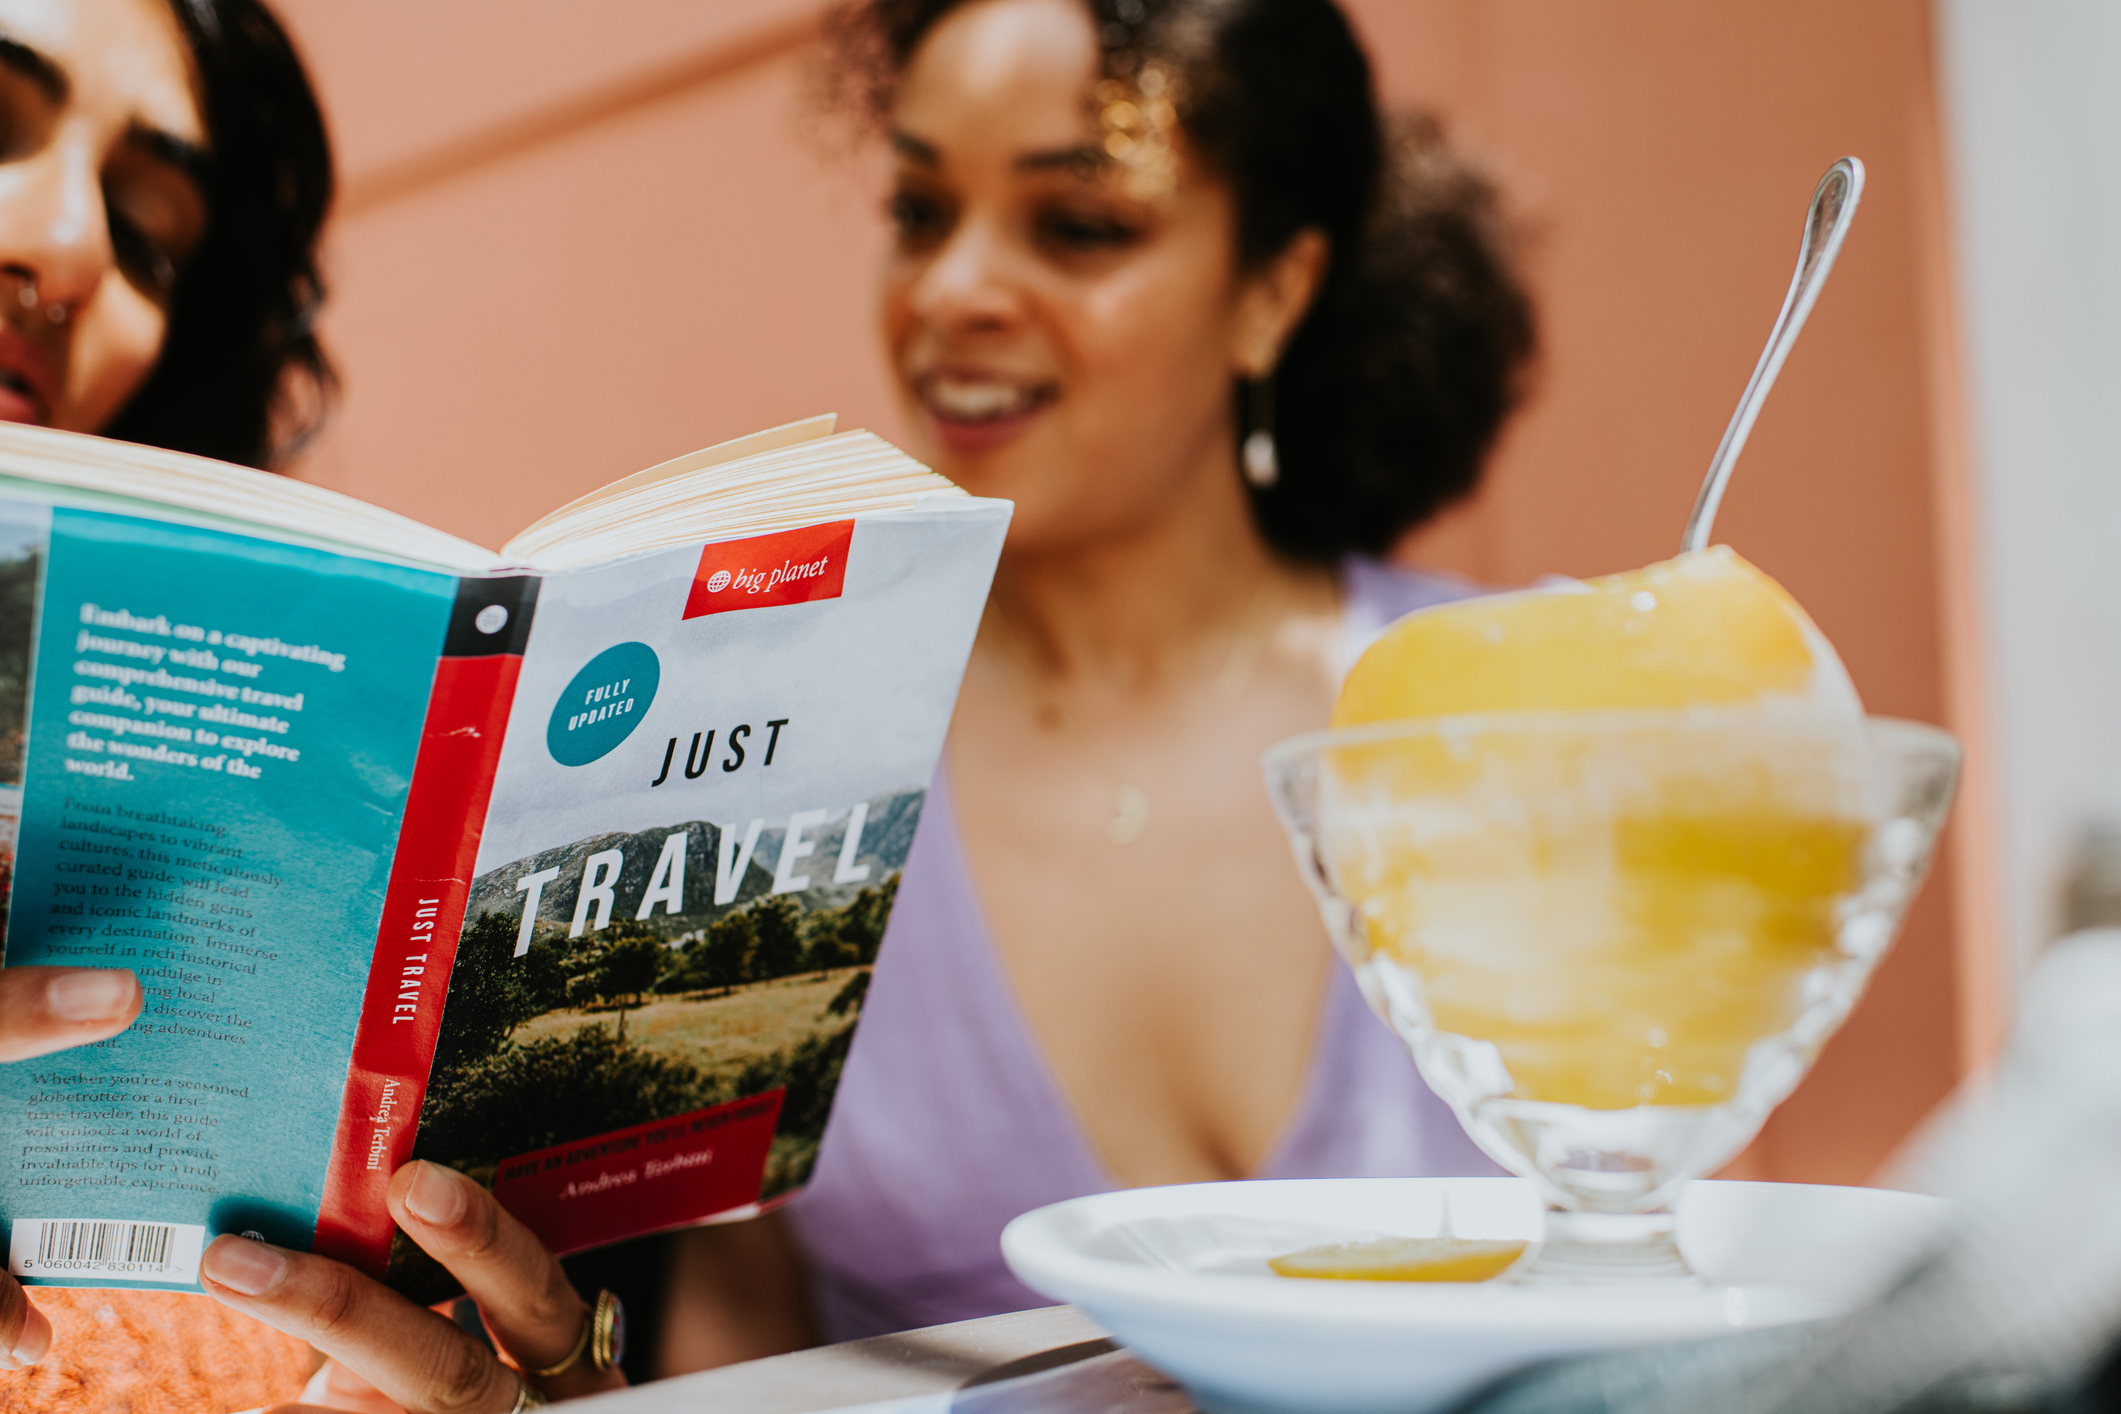 Woman reading a book titled &quot;Just Travel&quot; next to a bowl of dessert on a table